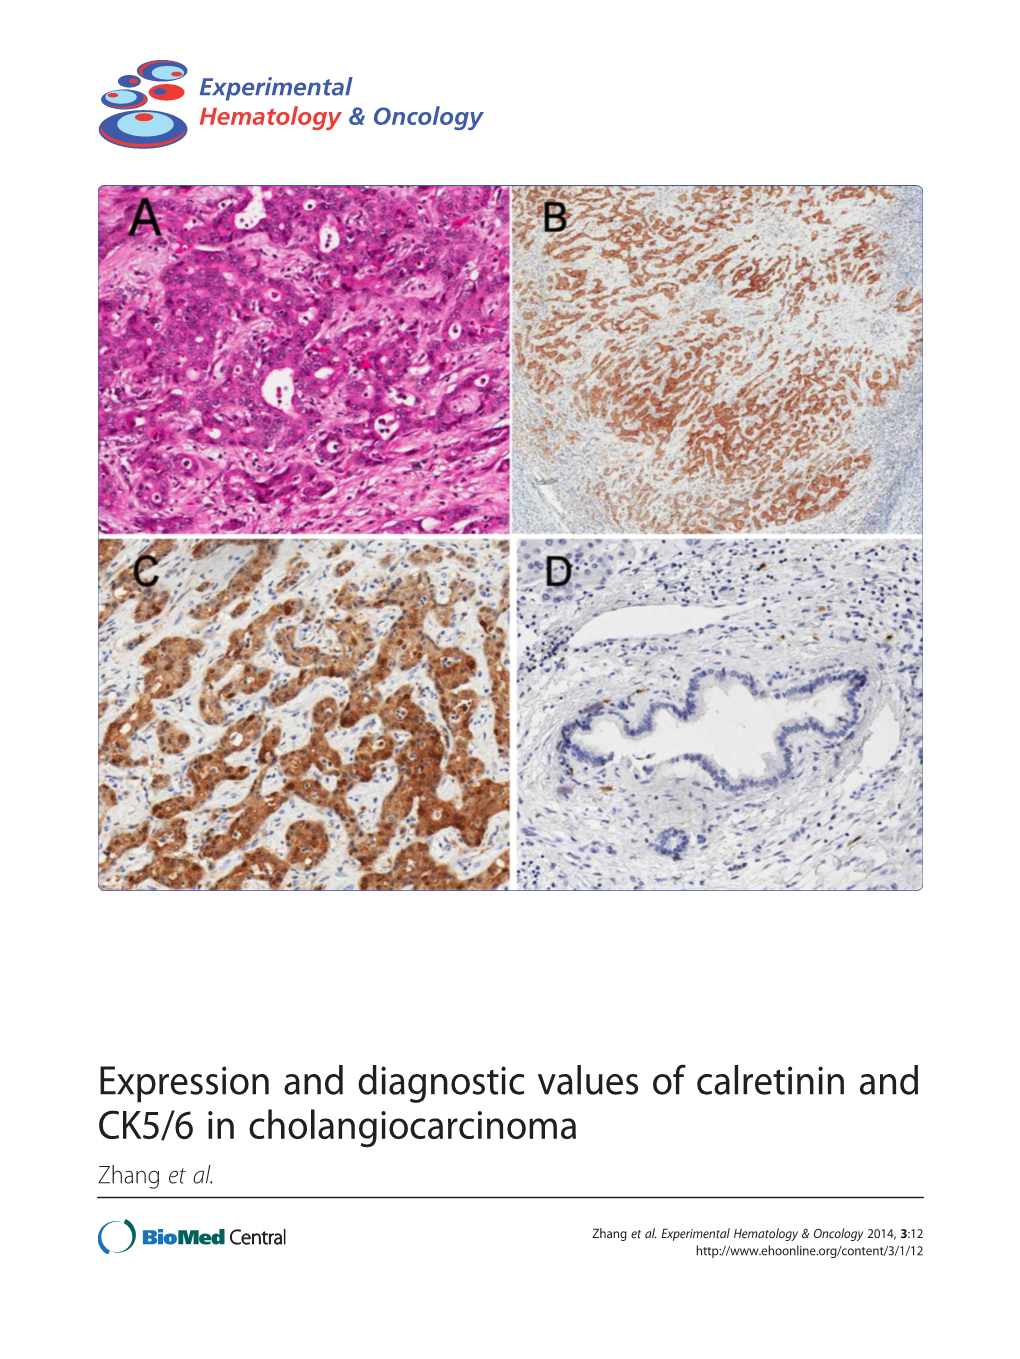 Expression and Diagnostic Values of Calretinin and CK5/6 in Cholangiocarcinoma Zhang Et Al